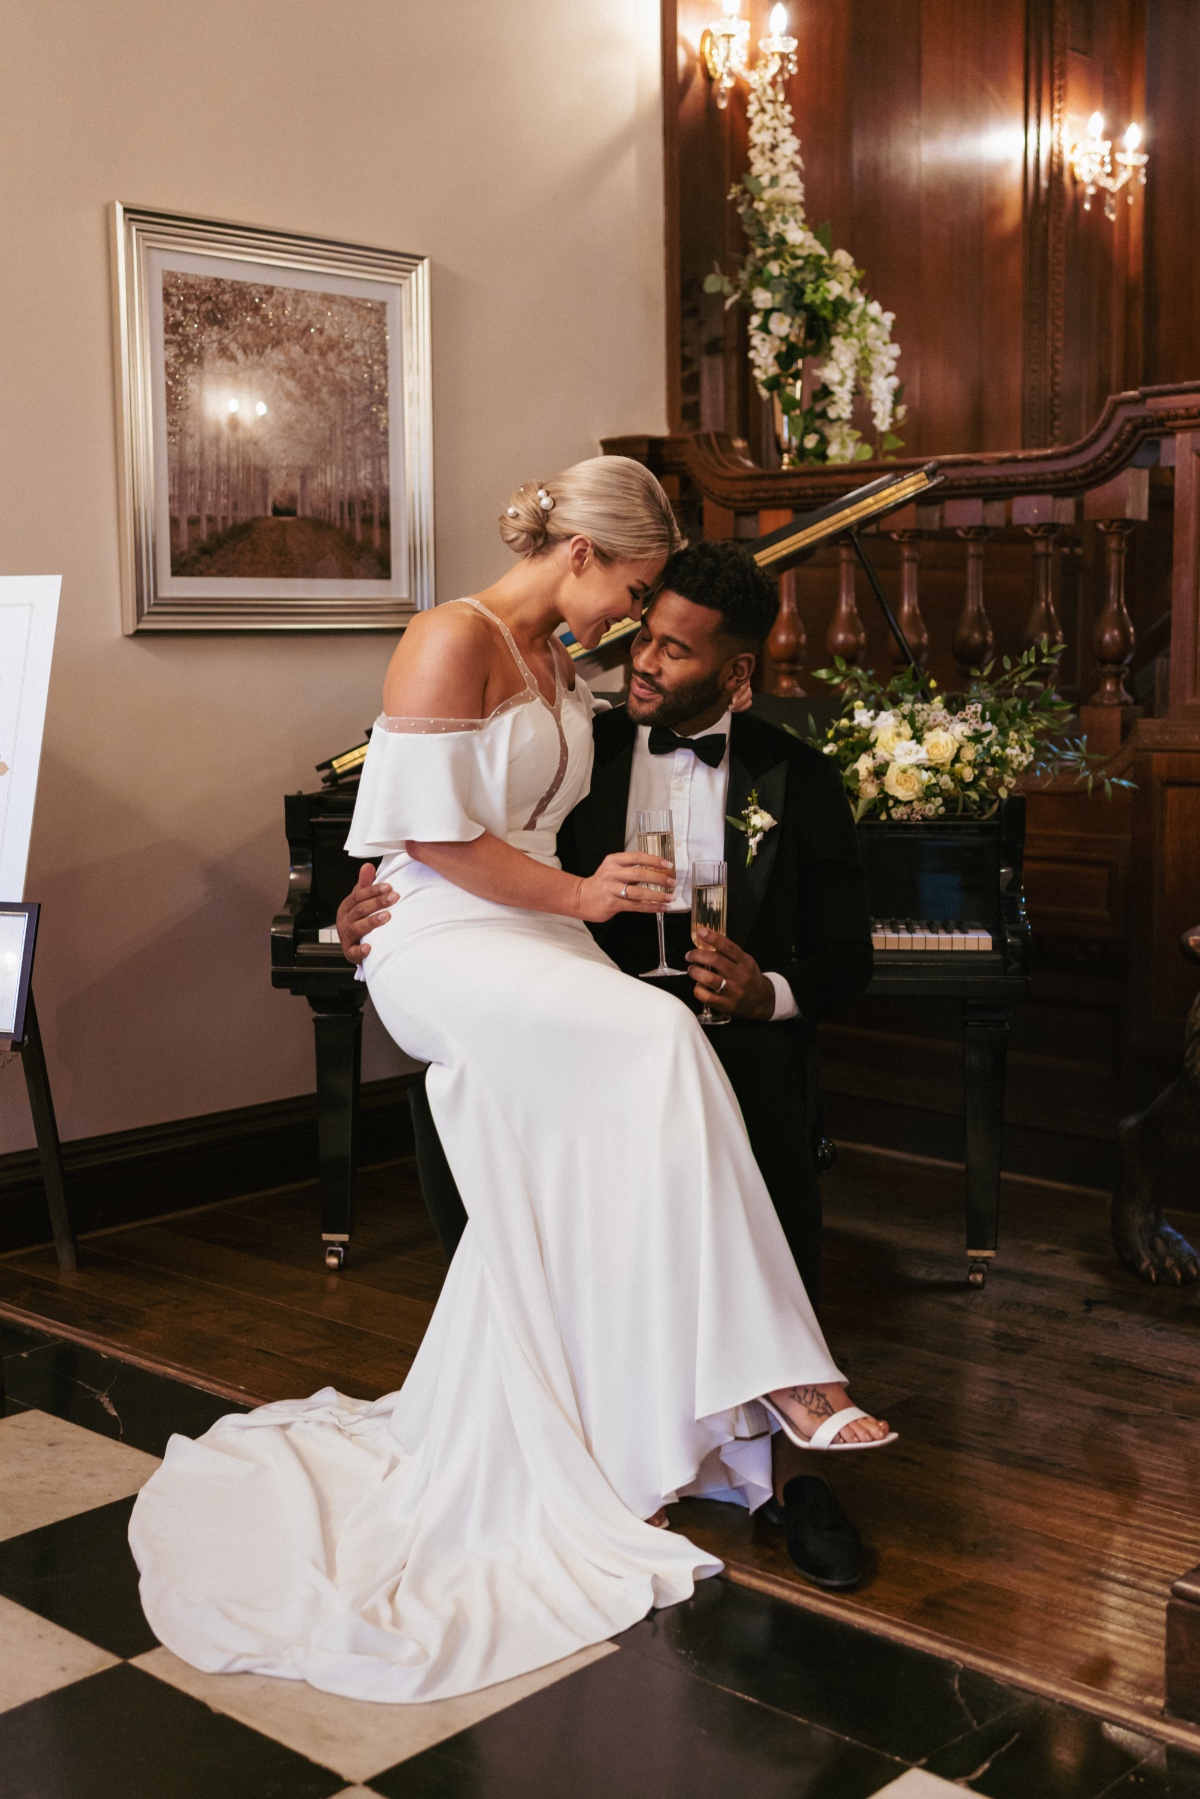 Styled Shoot In A Grand Estate Inspired By Poppin